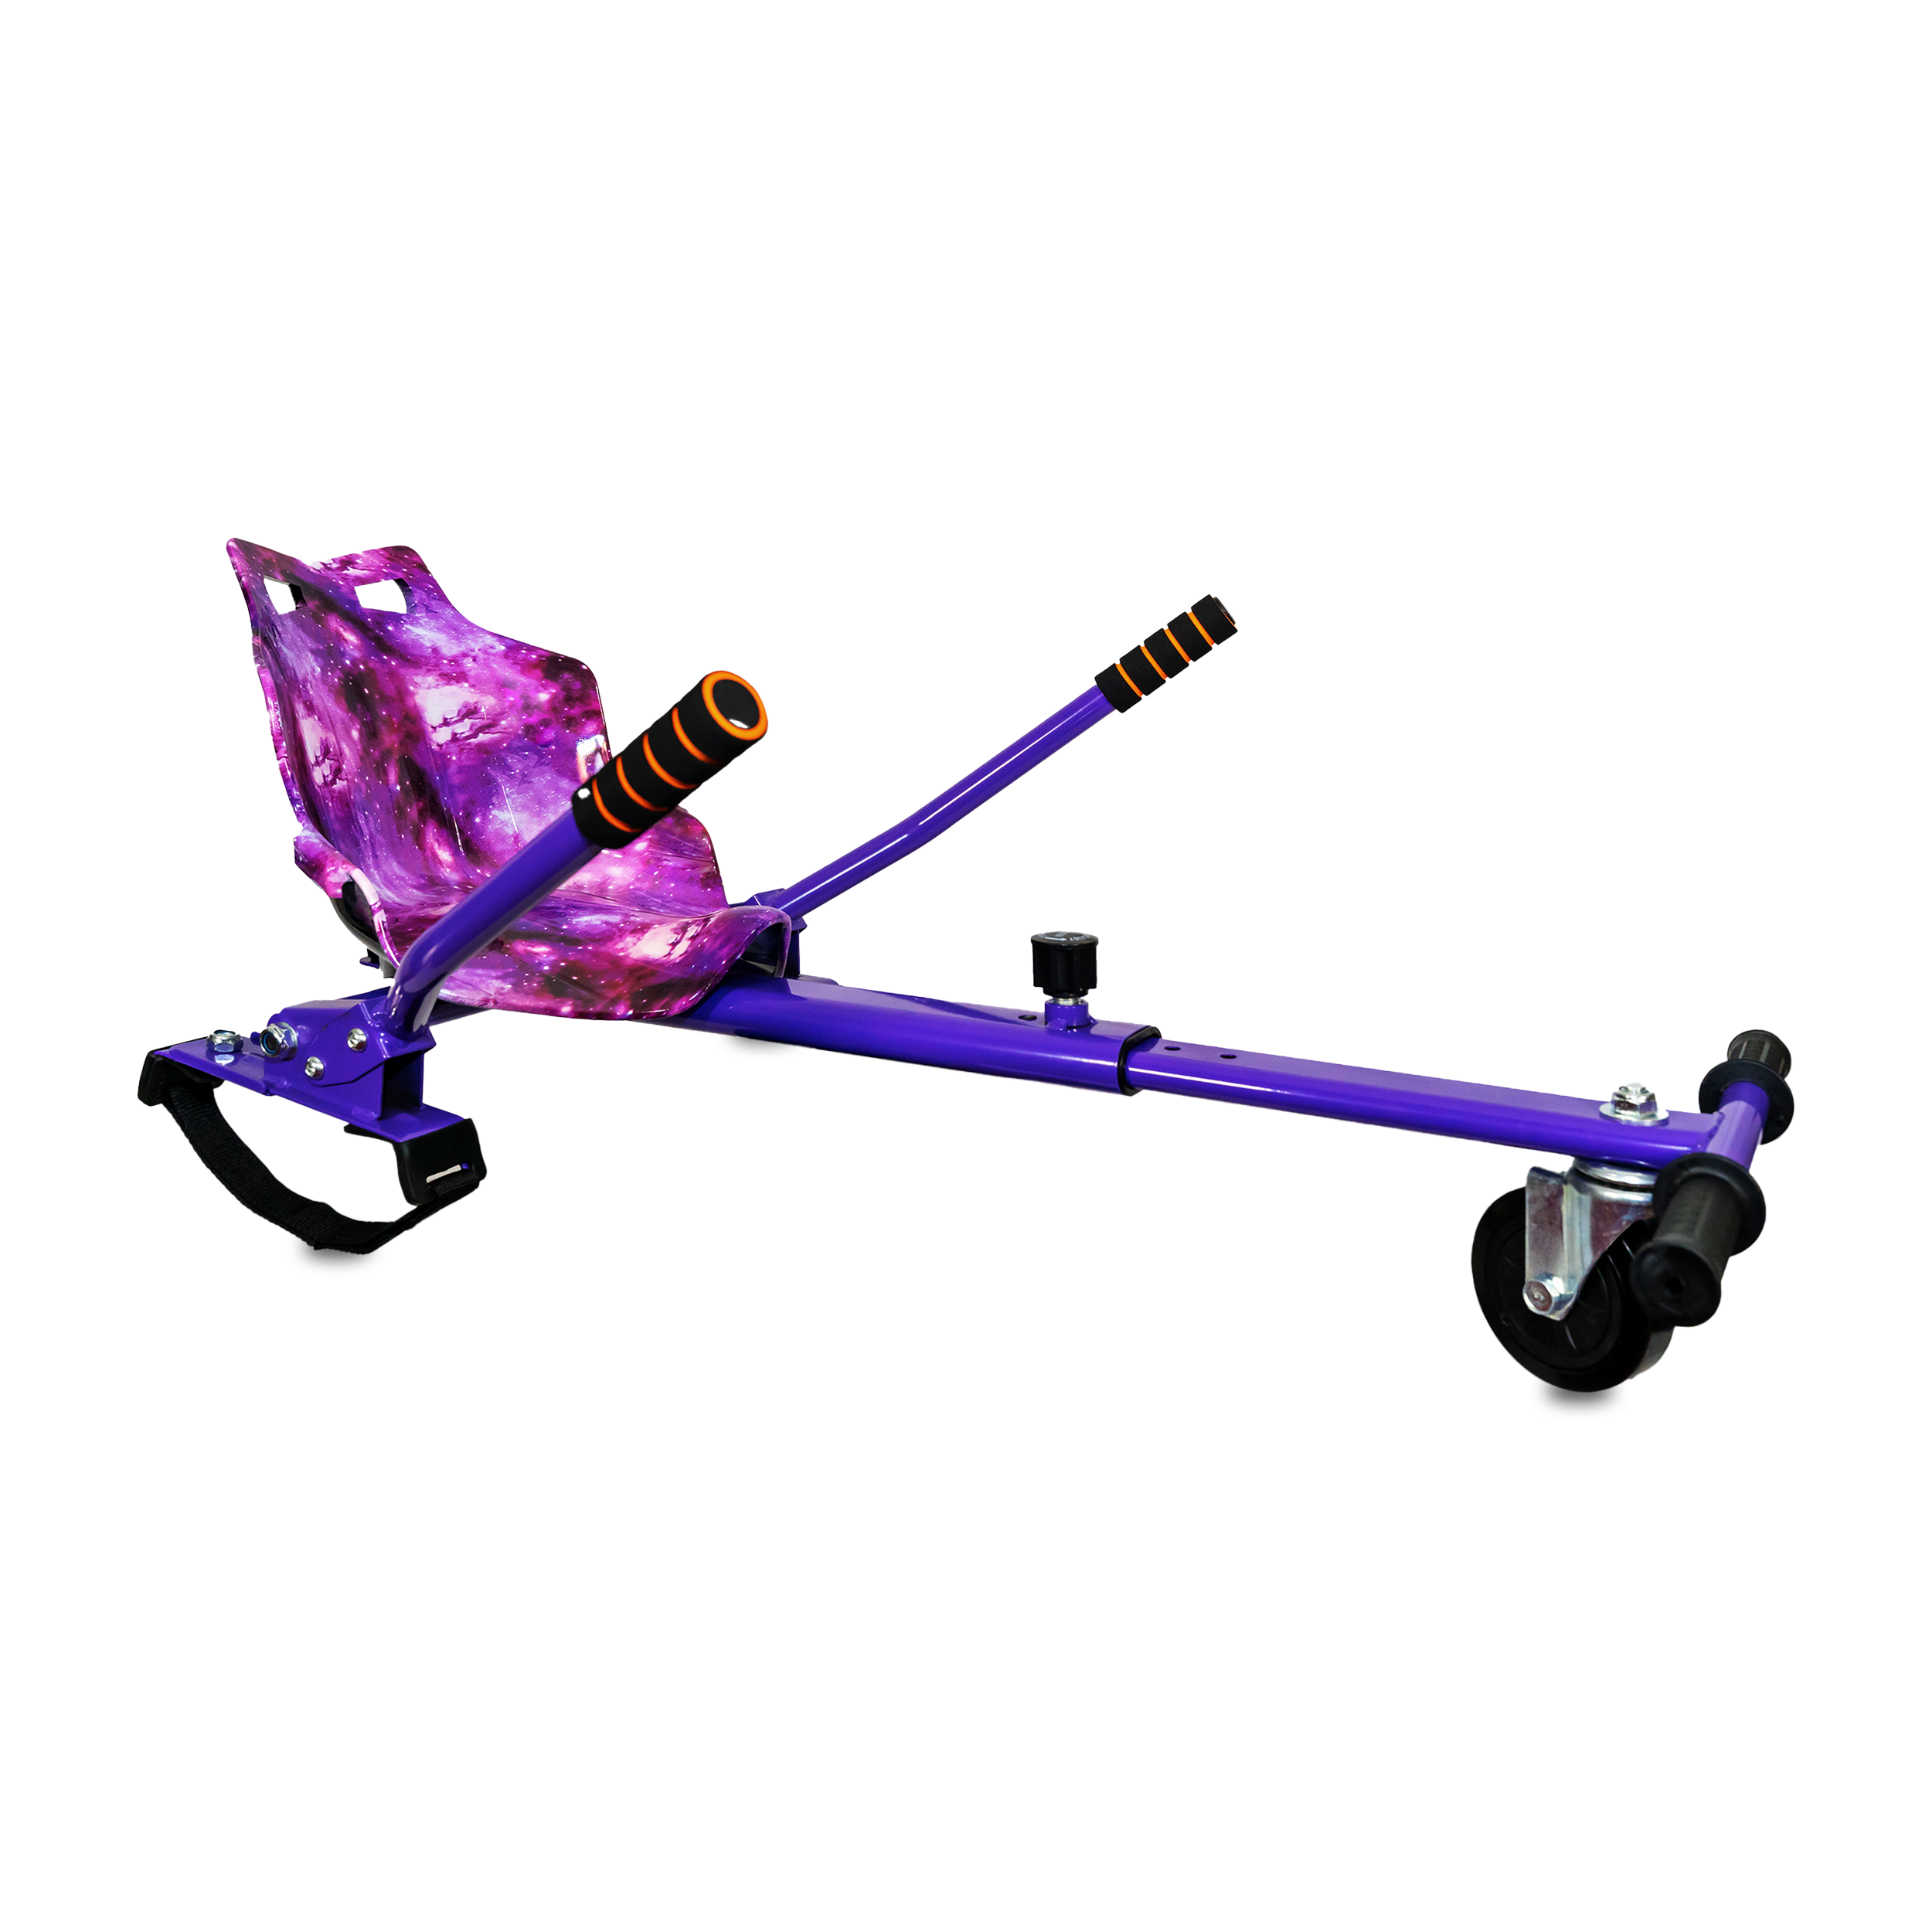 Galaxy purple hoverkart with galaxy patterned seat and black handlebars, ready for hoverboard conversion